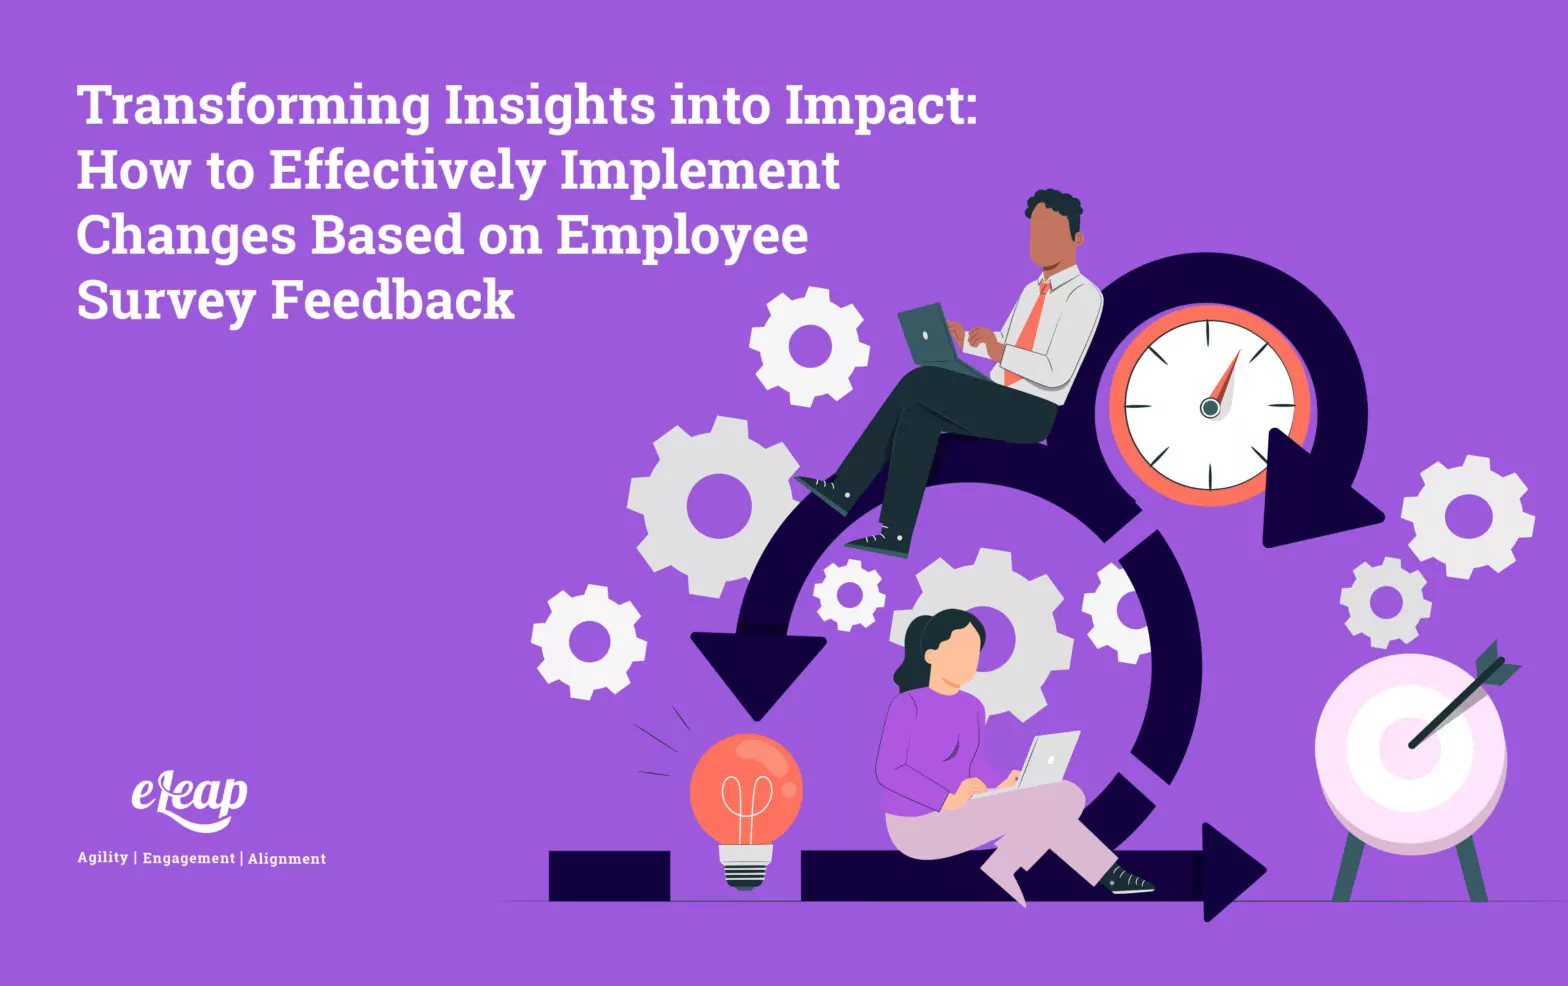 Transforming Insights into Impact: How to Effectively Implement Changes Based on Employee Survey Feedback